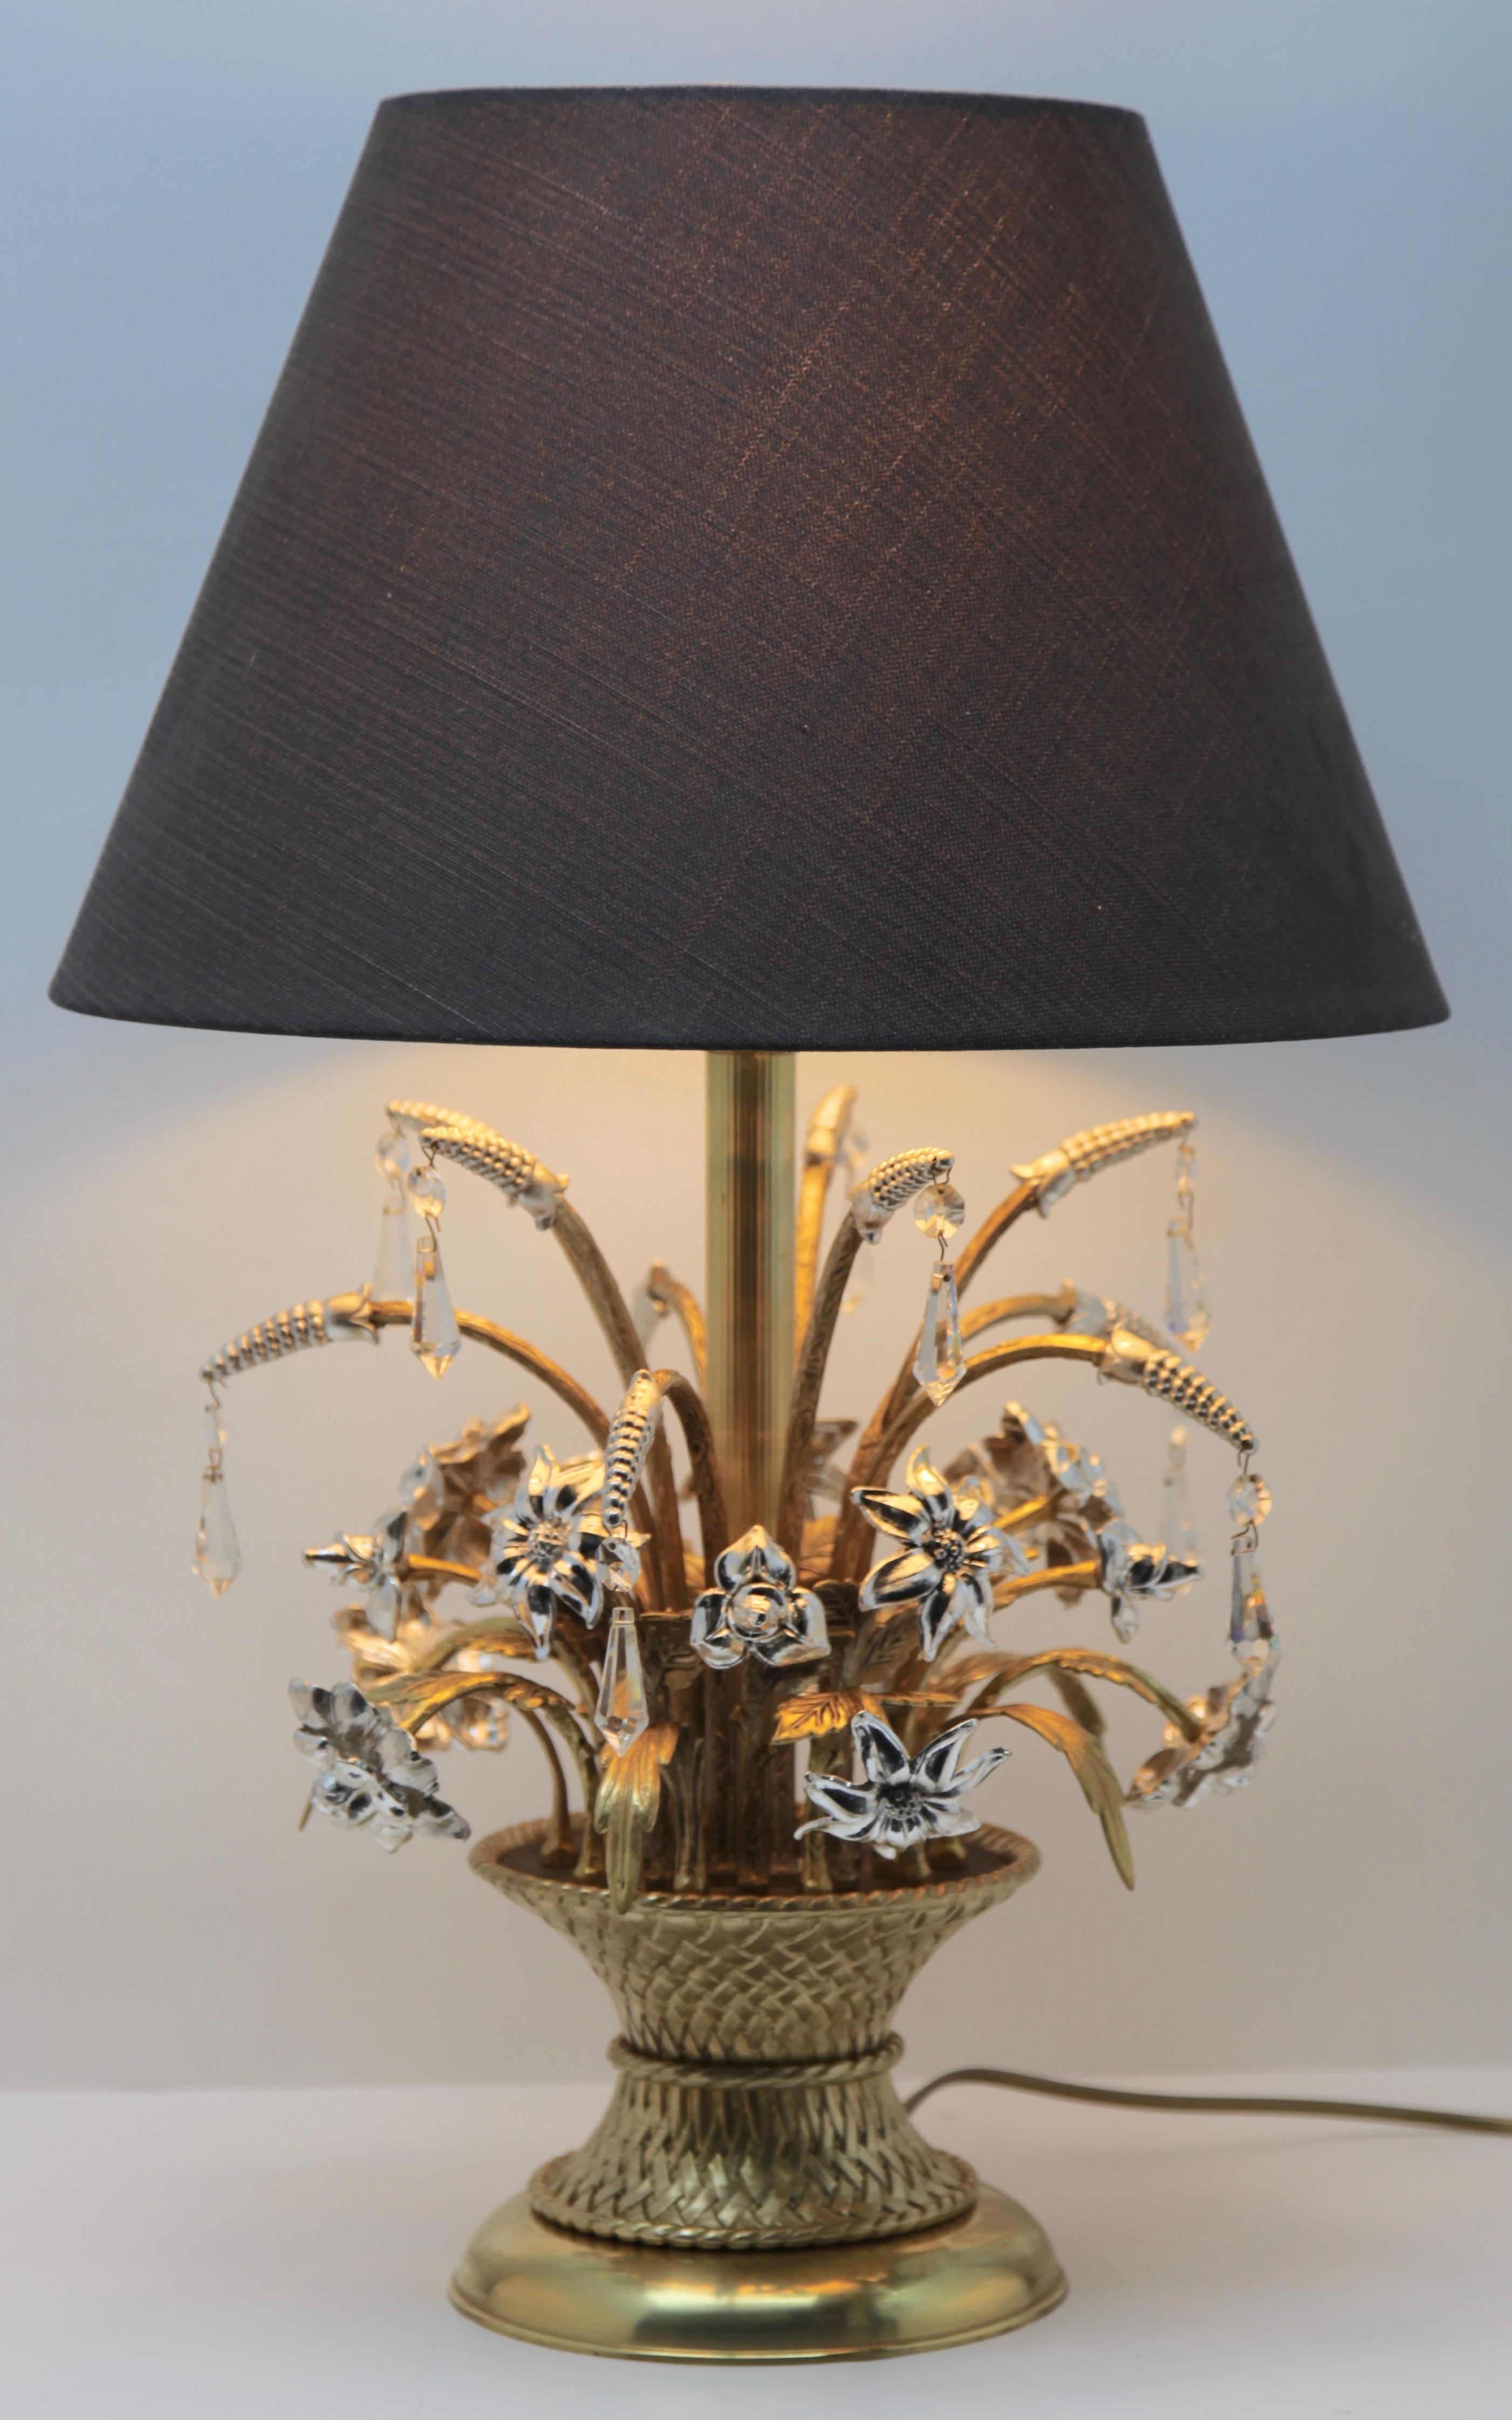 French Lamp Representing a Bouquet of Brass and Silver Metal Flowers in a Basket, 1960s For Sale